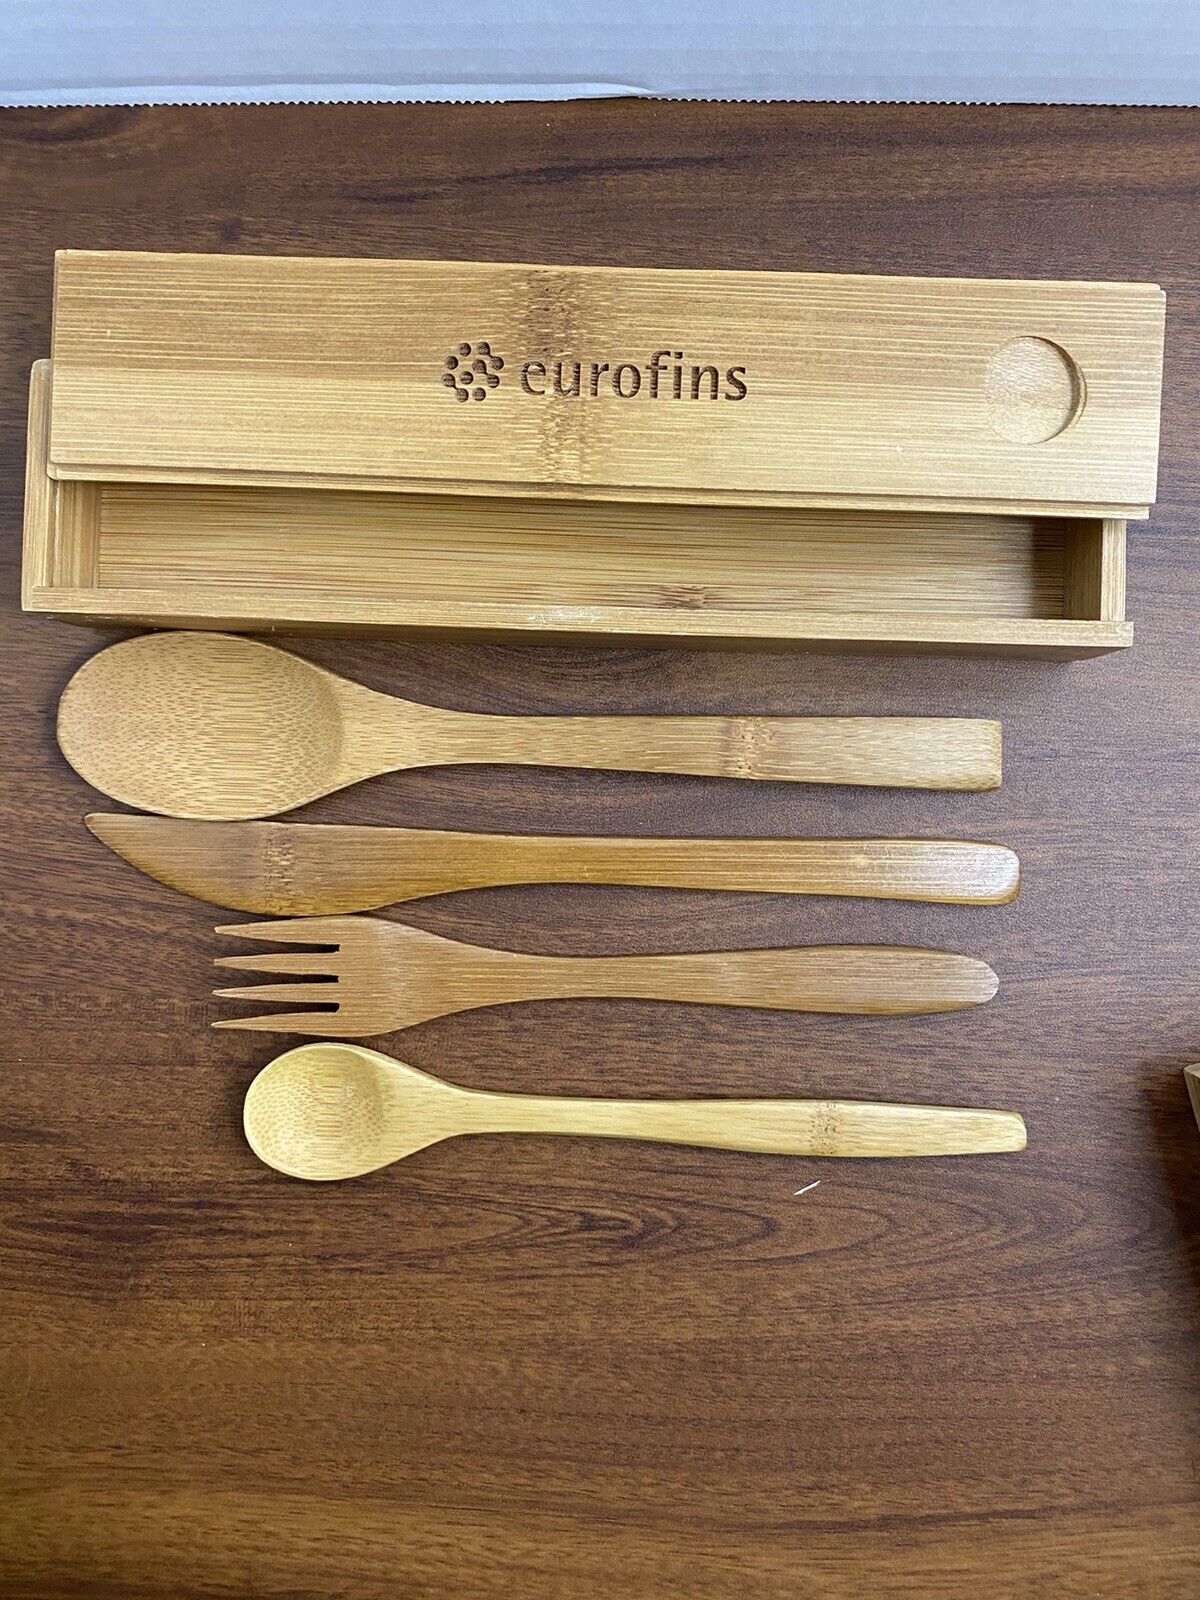 pharmaceutical drug rep collectibles eurofins genetic testing co.wooden flatware